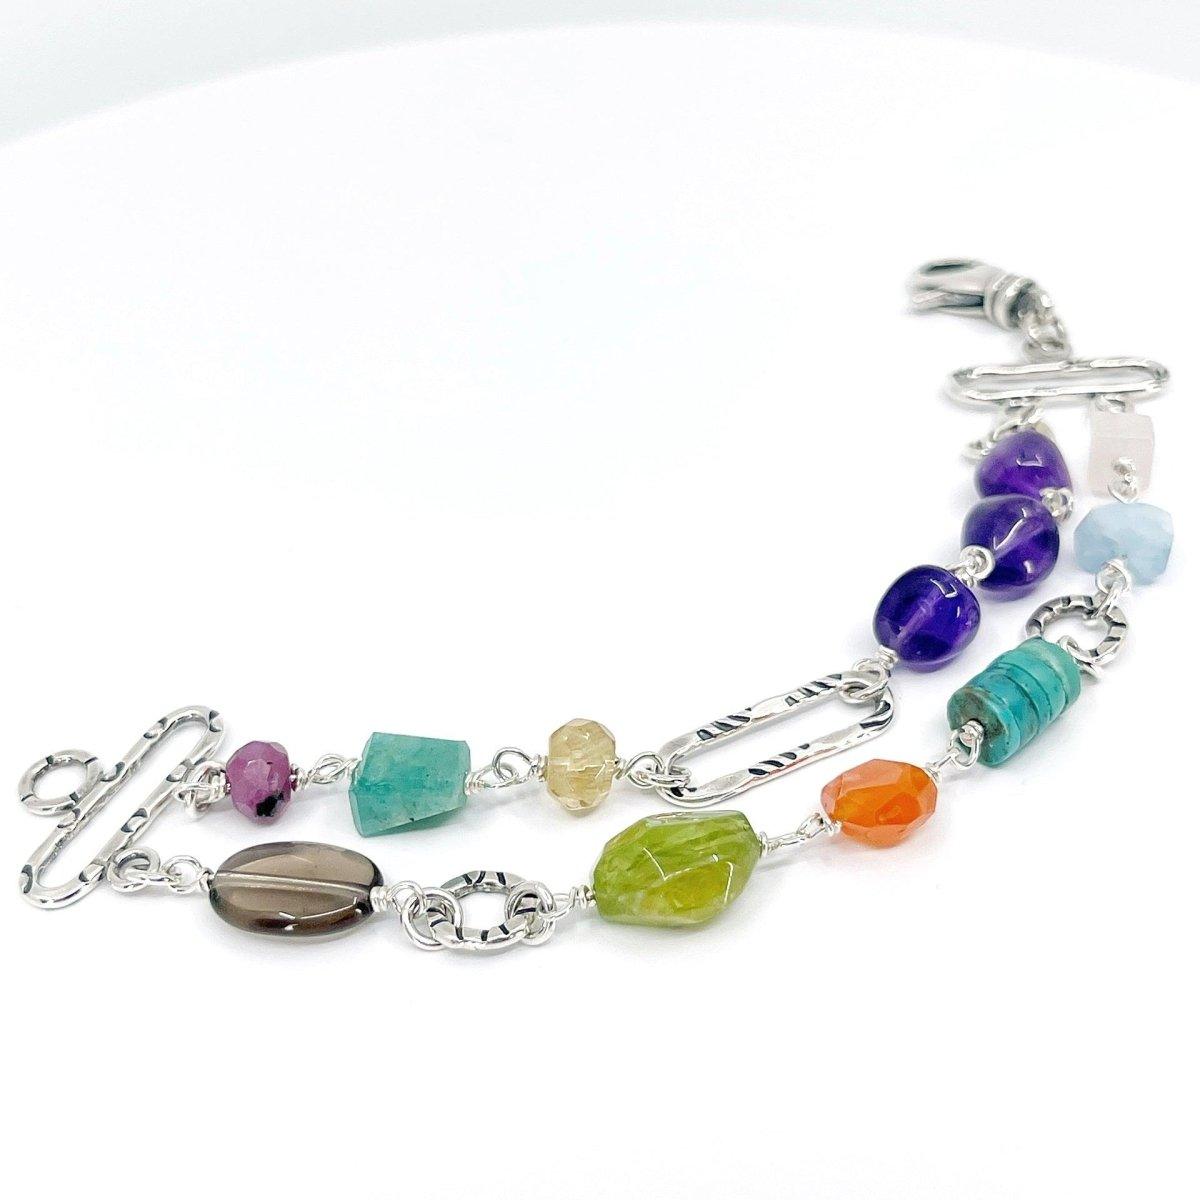 Colorful Bracelet with Sterling Silver and Gemstones - Kristin Christopher